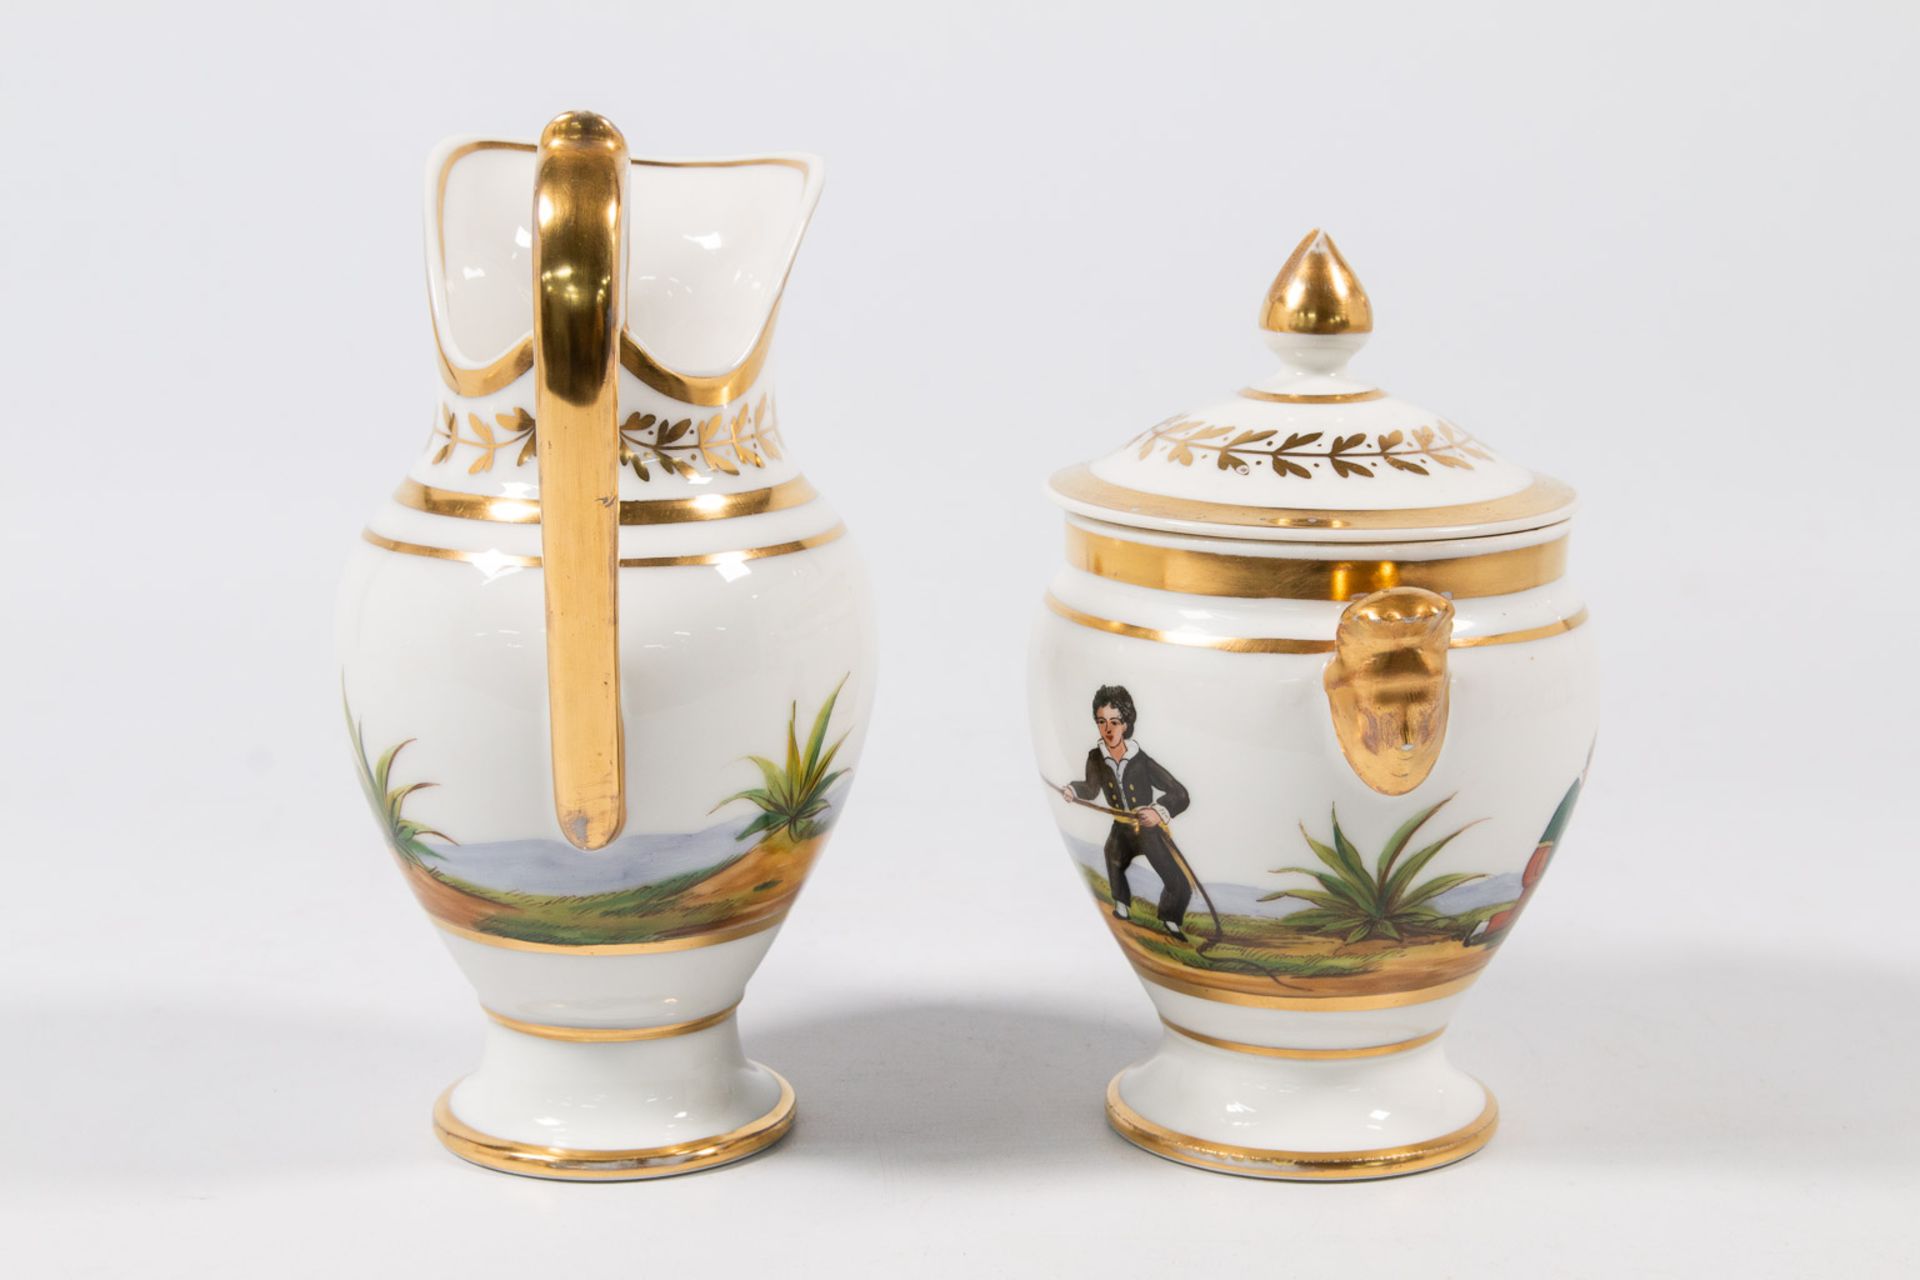 A Complete 'Vieux Bruxelles' coffee and tea service made of porcelain. - Image 37 of 53